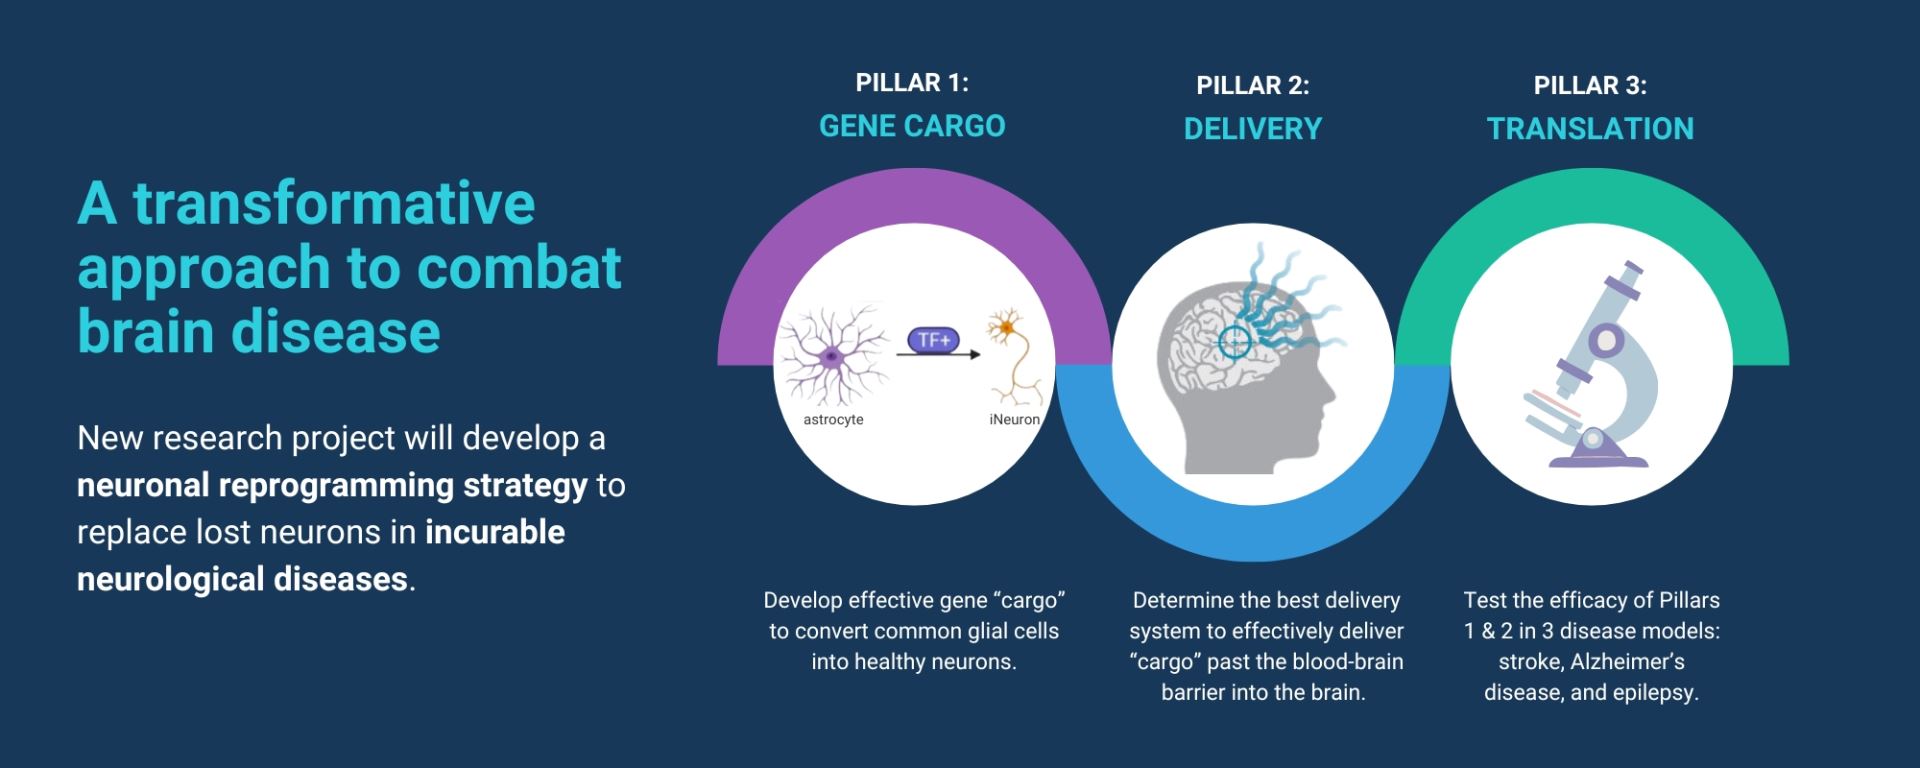 A transformative approach to combat brain disease. New research project will develop a neuronal reprogramming strategy to replace lose neurons in incurable neurological diseases. Pillar 1: Gene Cargo. Develop effective gene 